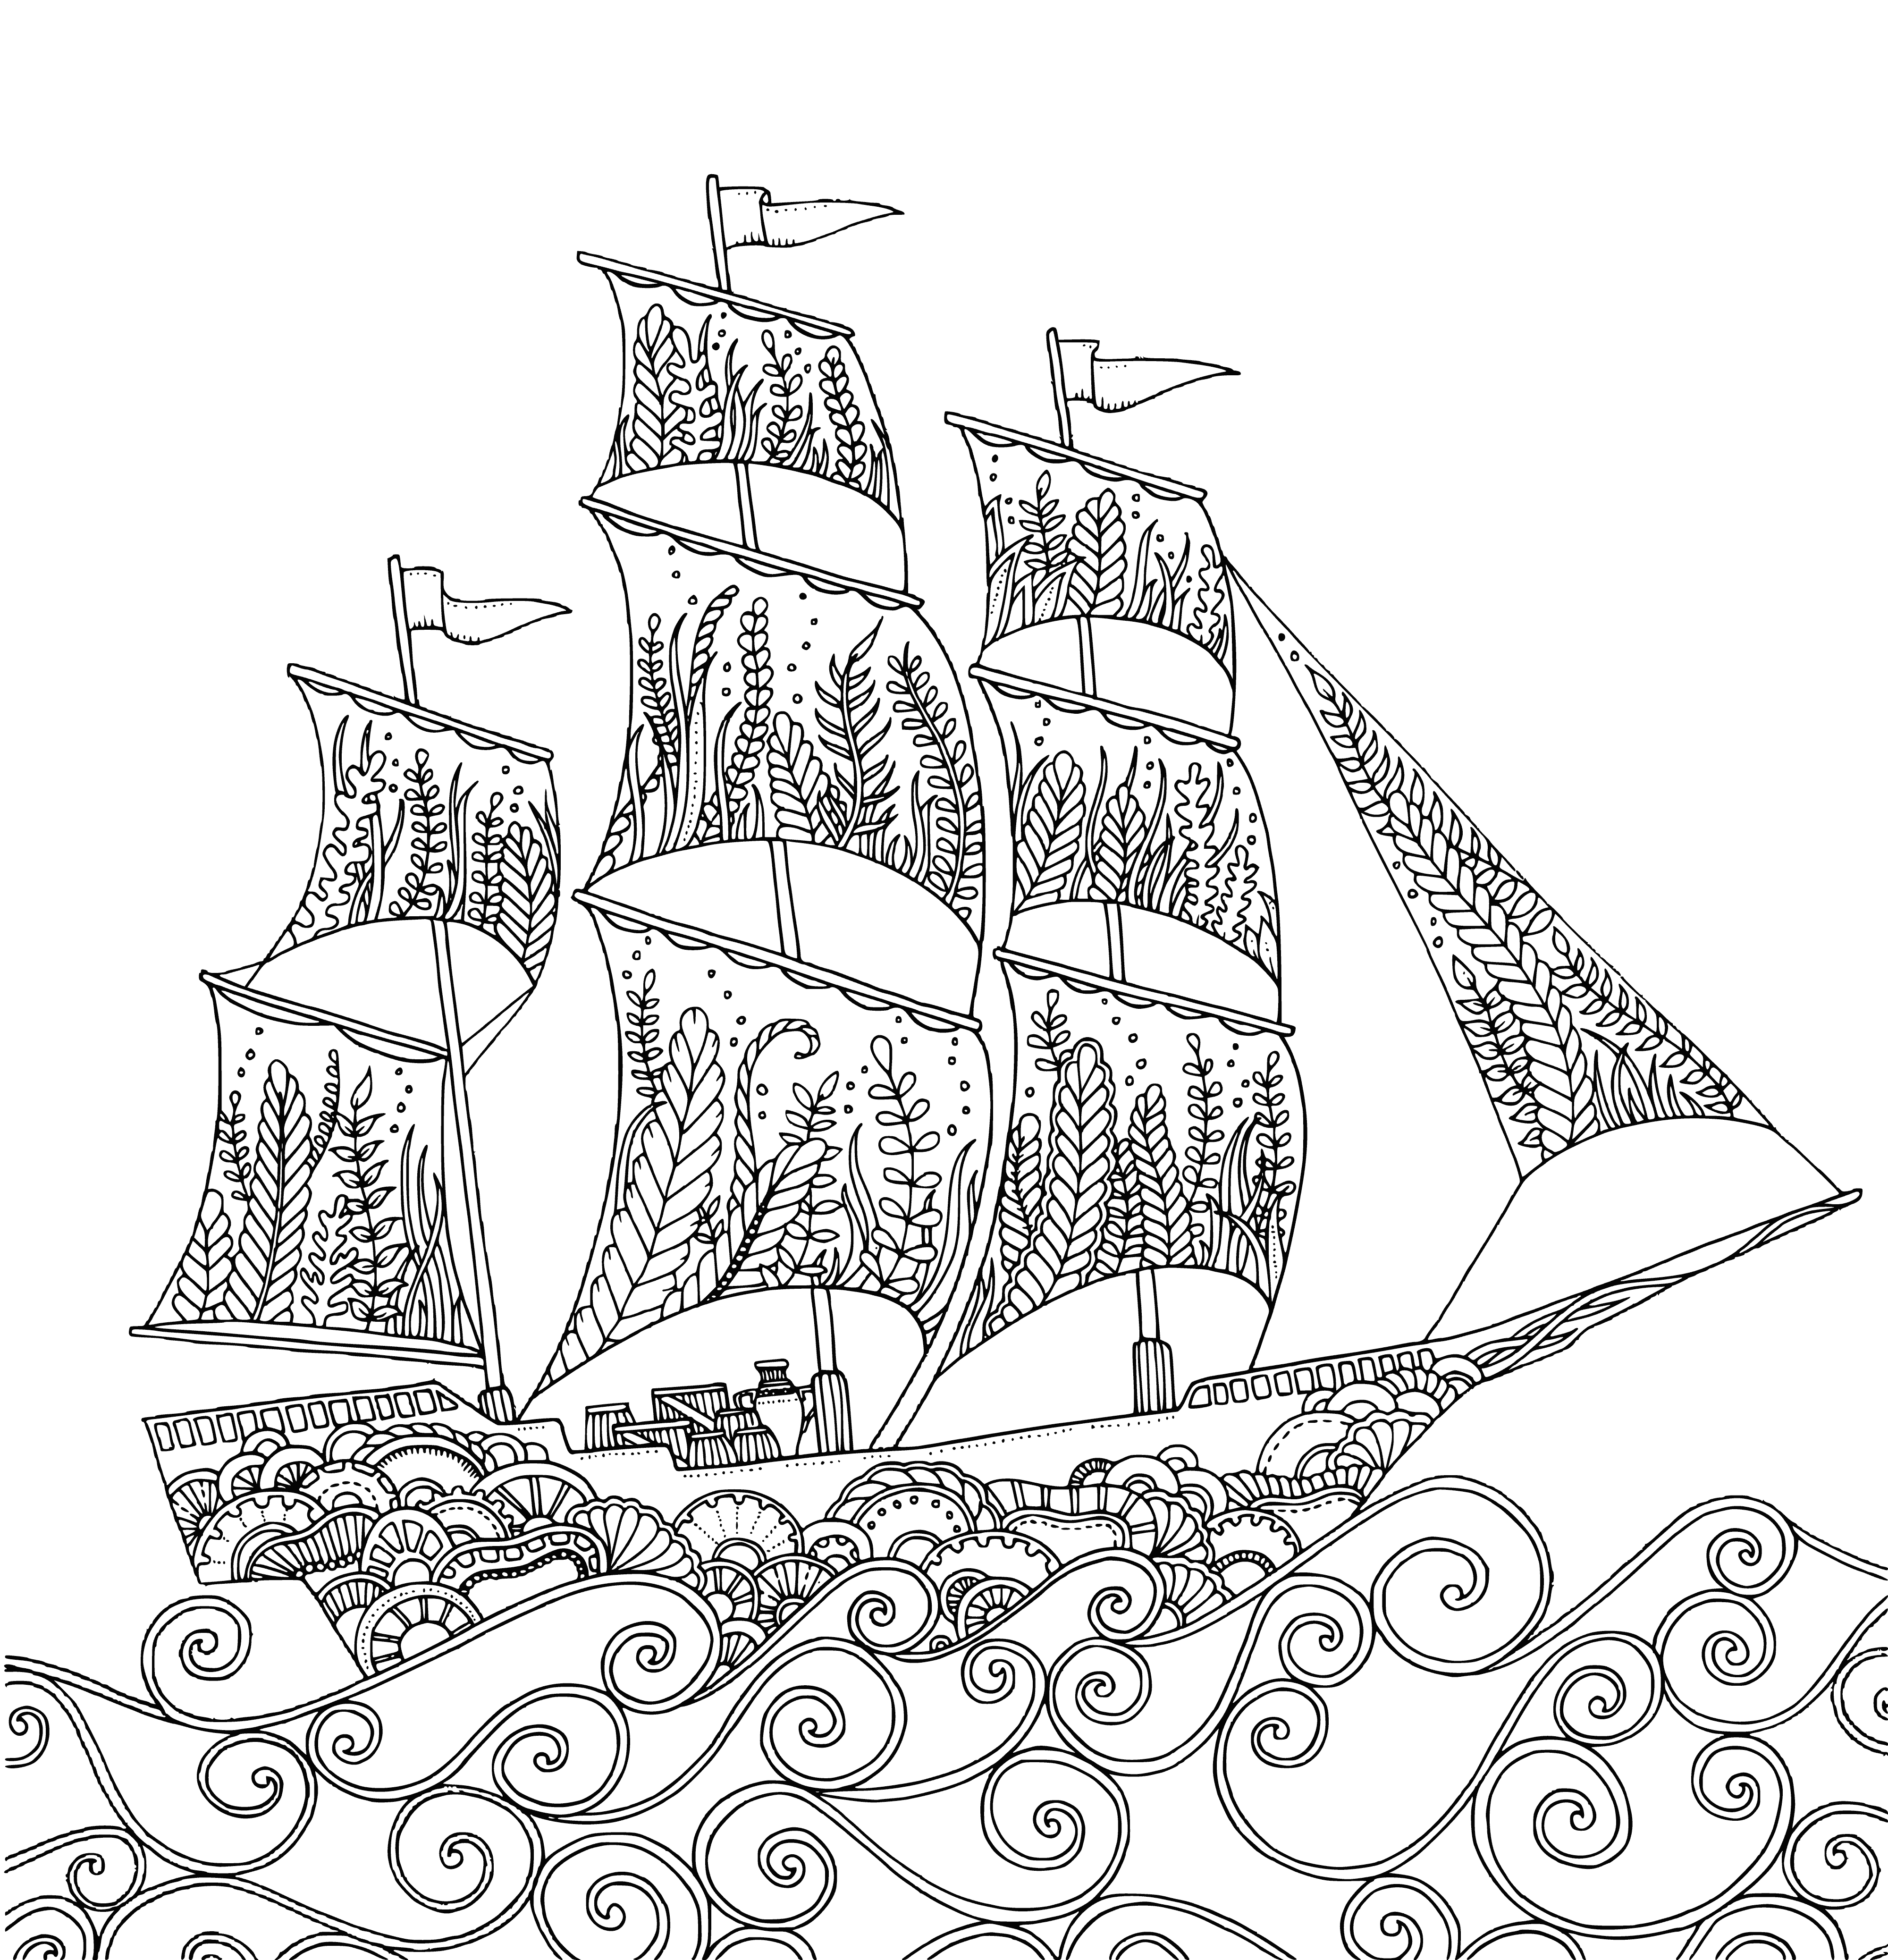 coloring page: Ship sailing on open sea with blue trim, 3 masts, billowing sails, and waves crashing against hull. Sun shining in clear sky.